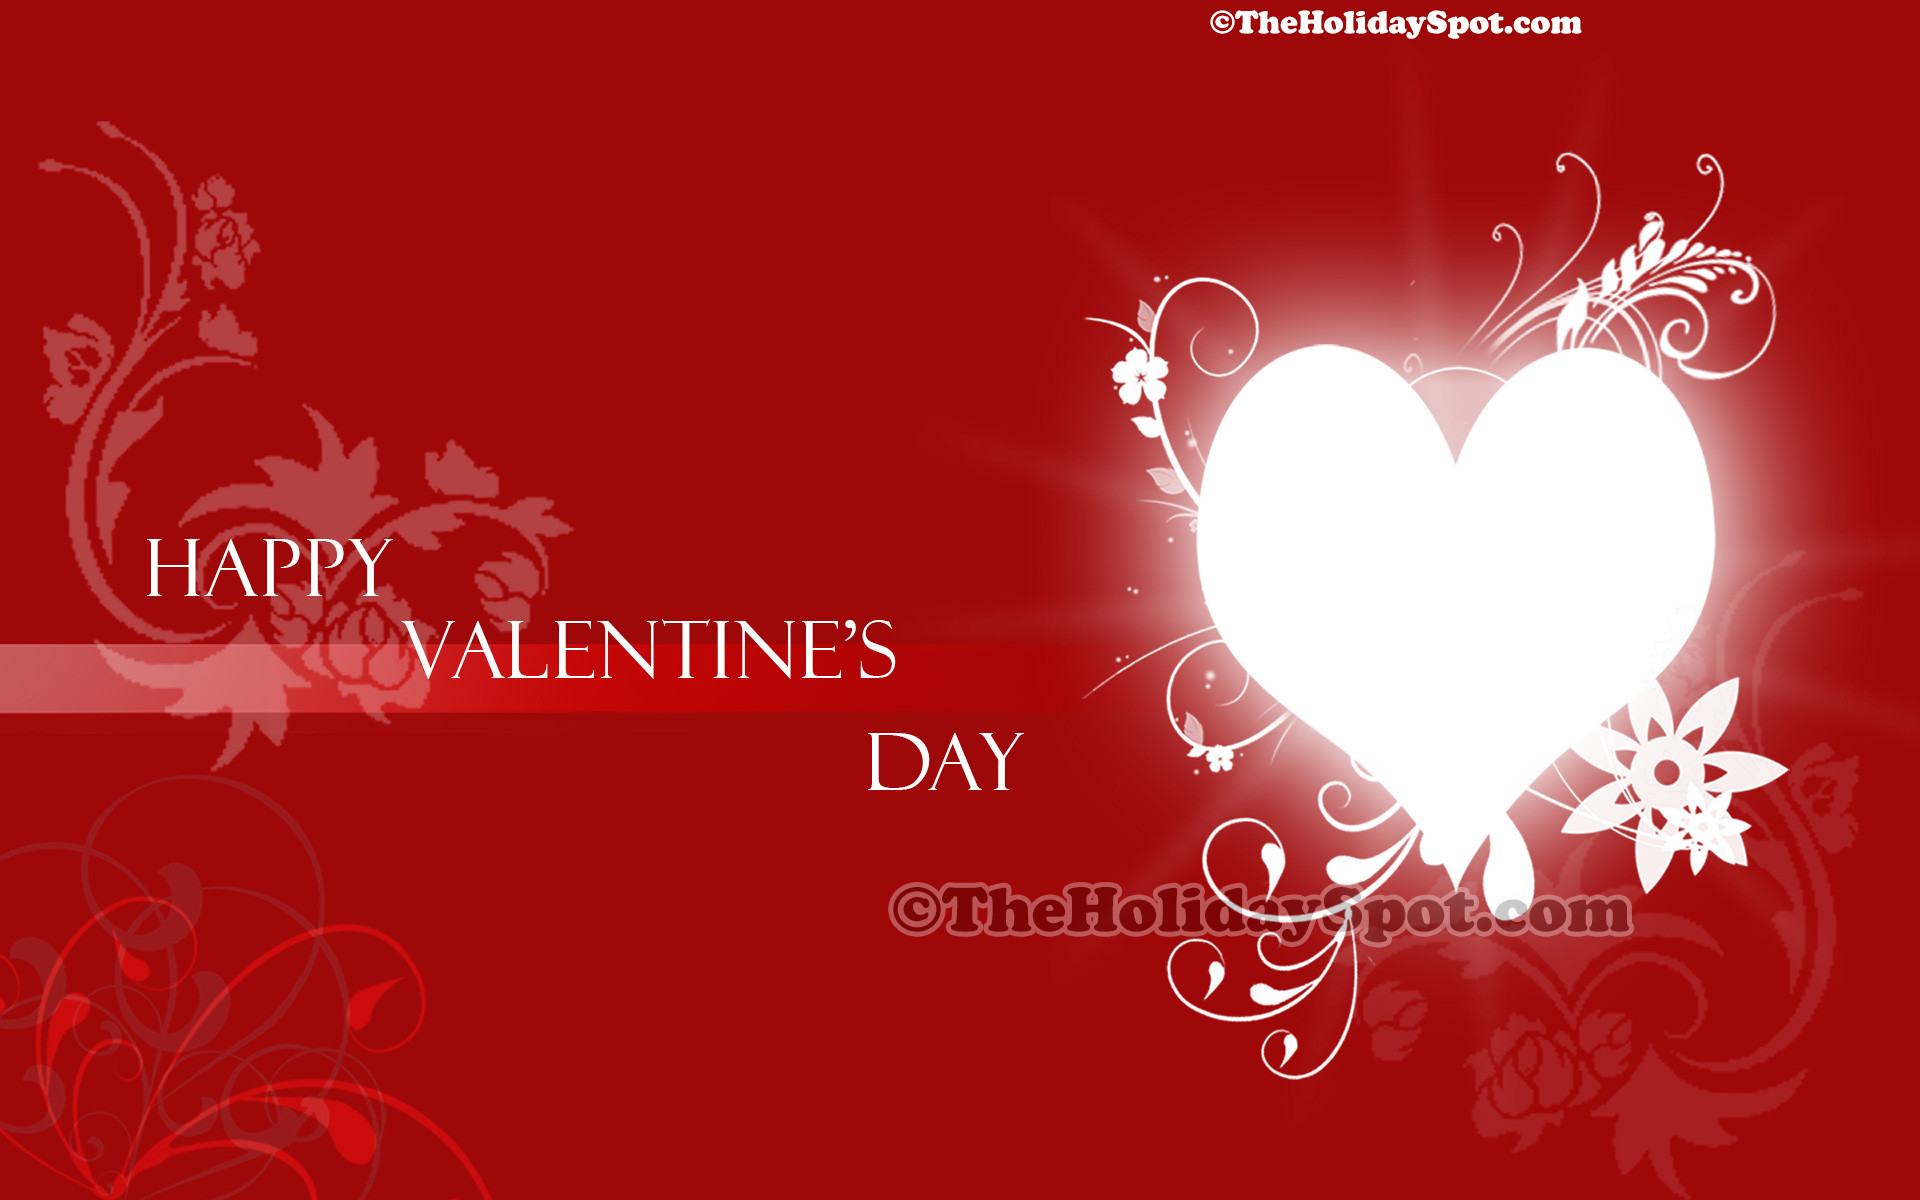 A wonderful graphics based on Valentines Day